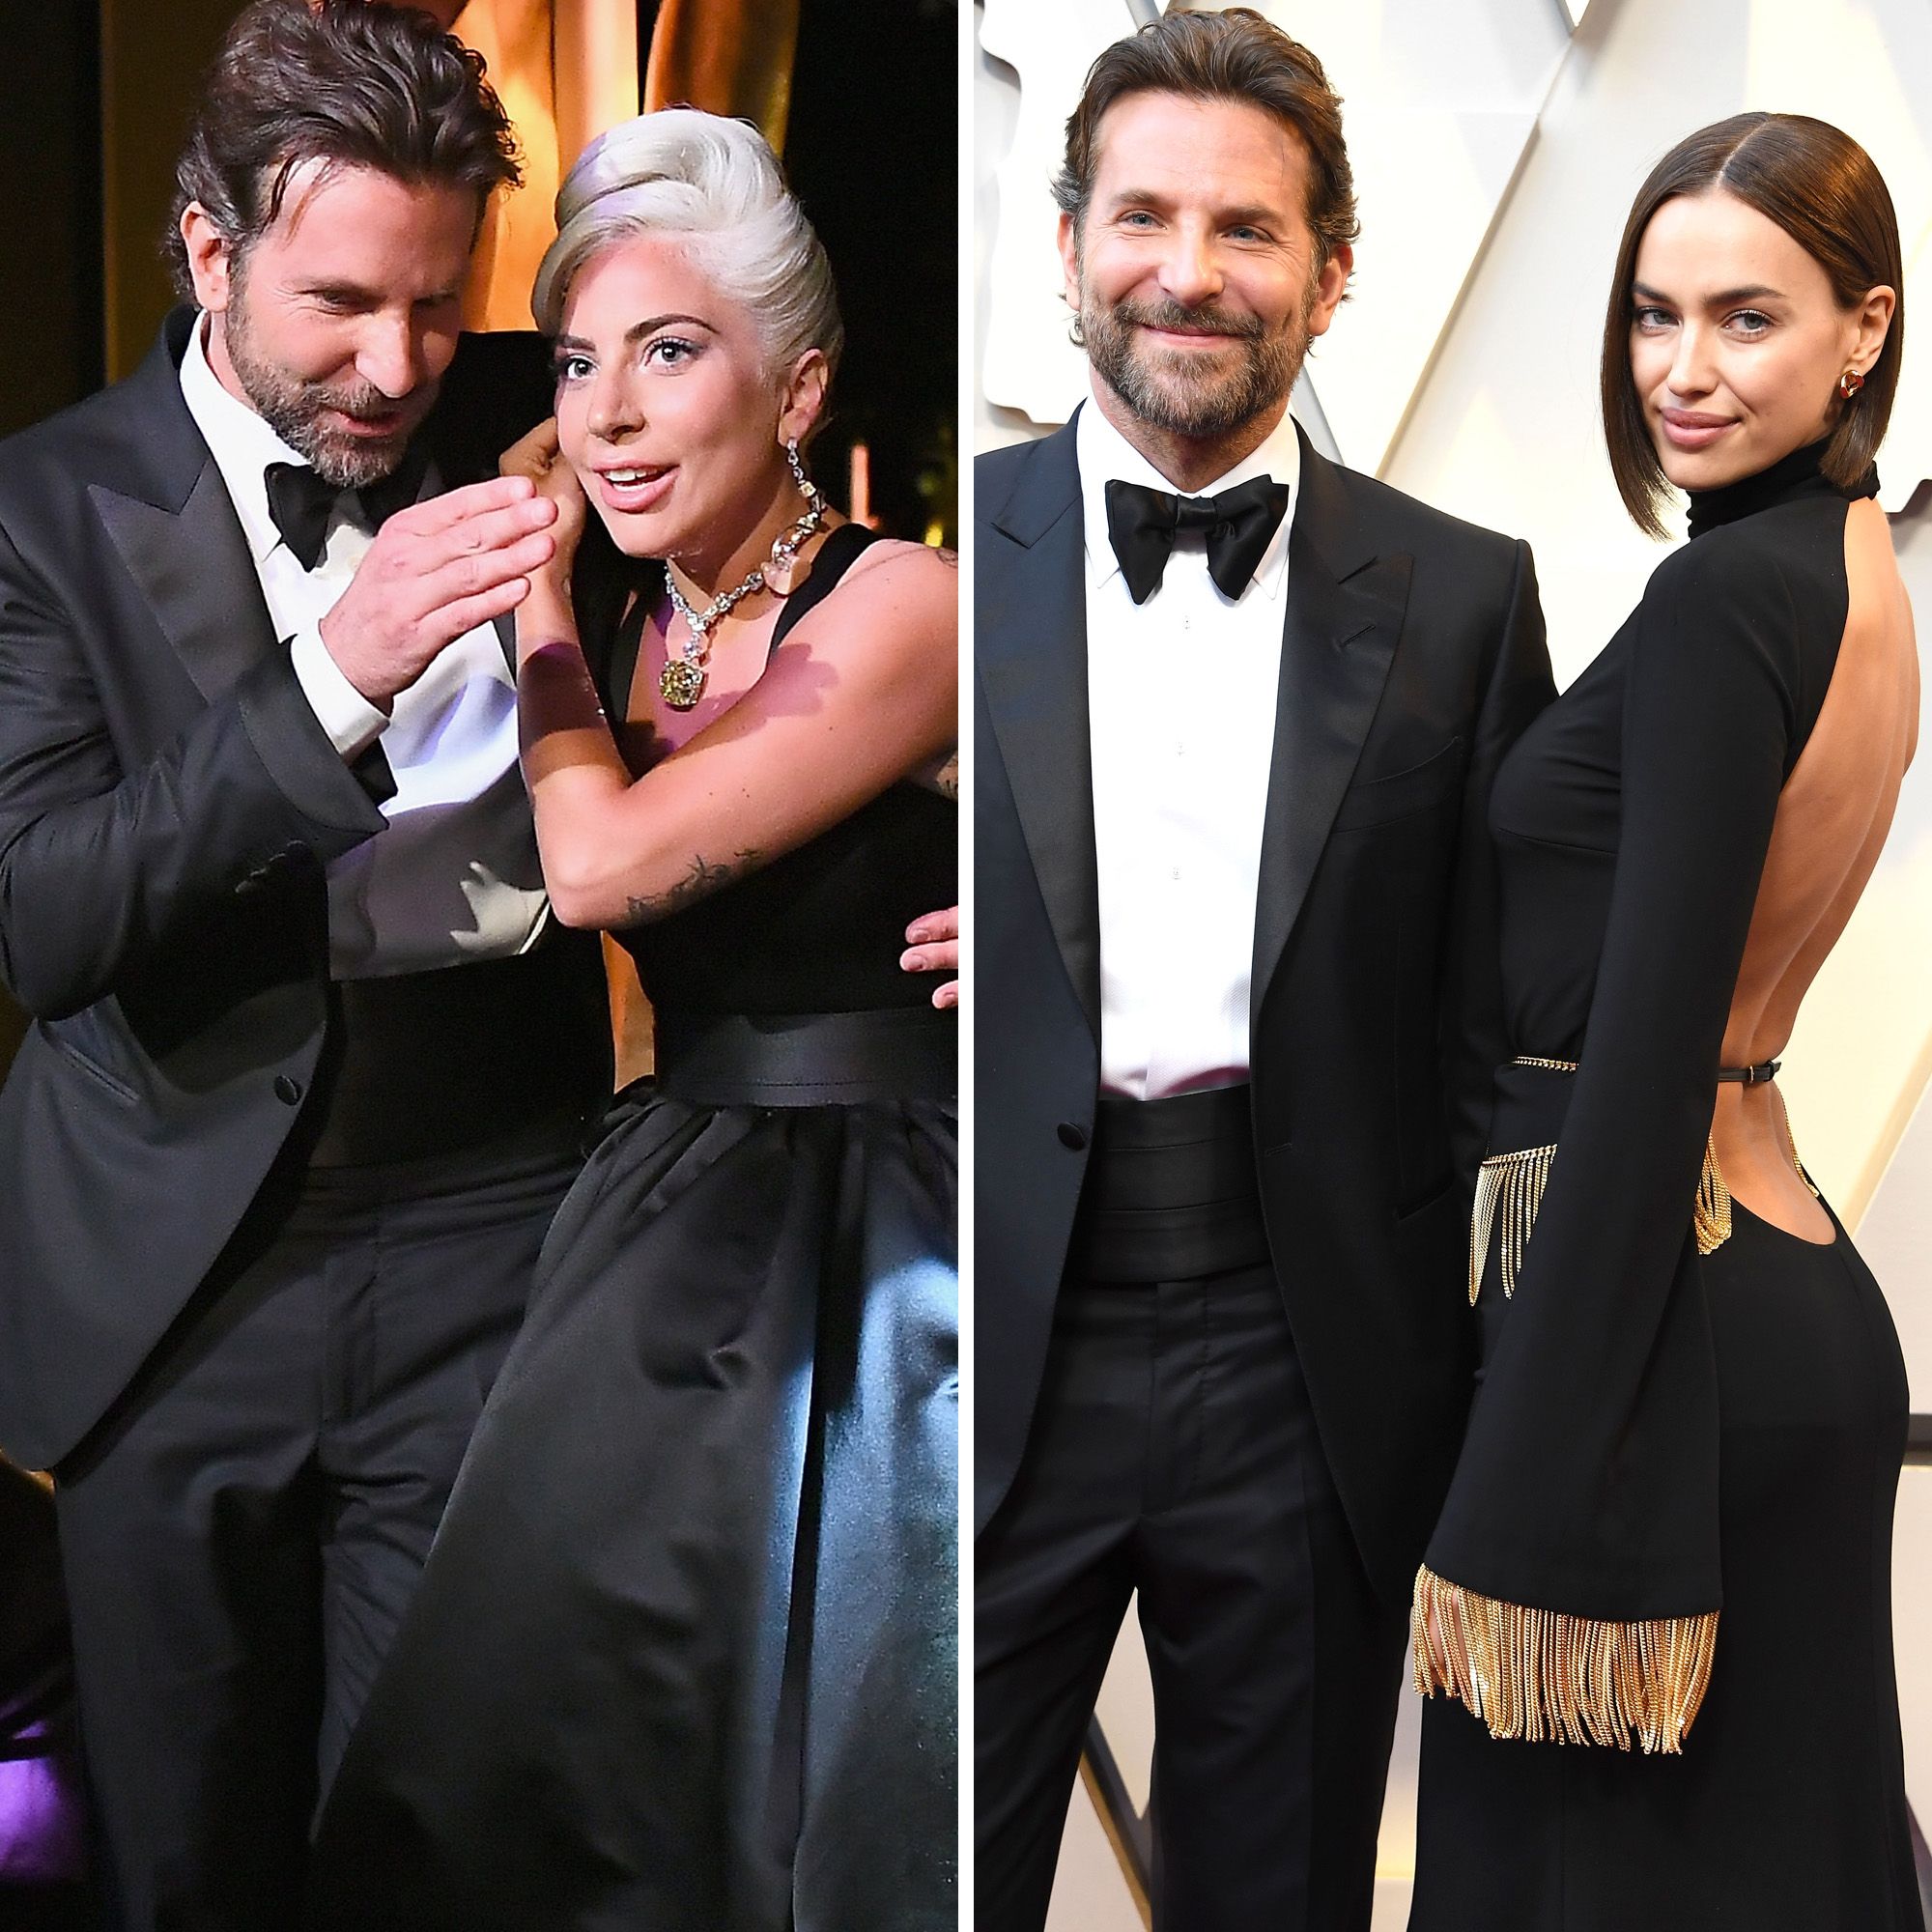 How Irina Shayk Feels About Bradley Cooper and Lady Gaga's Relationship